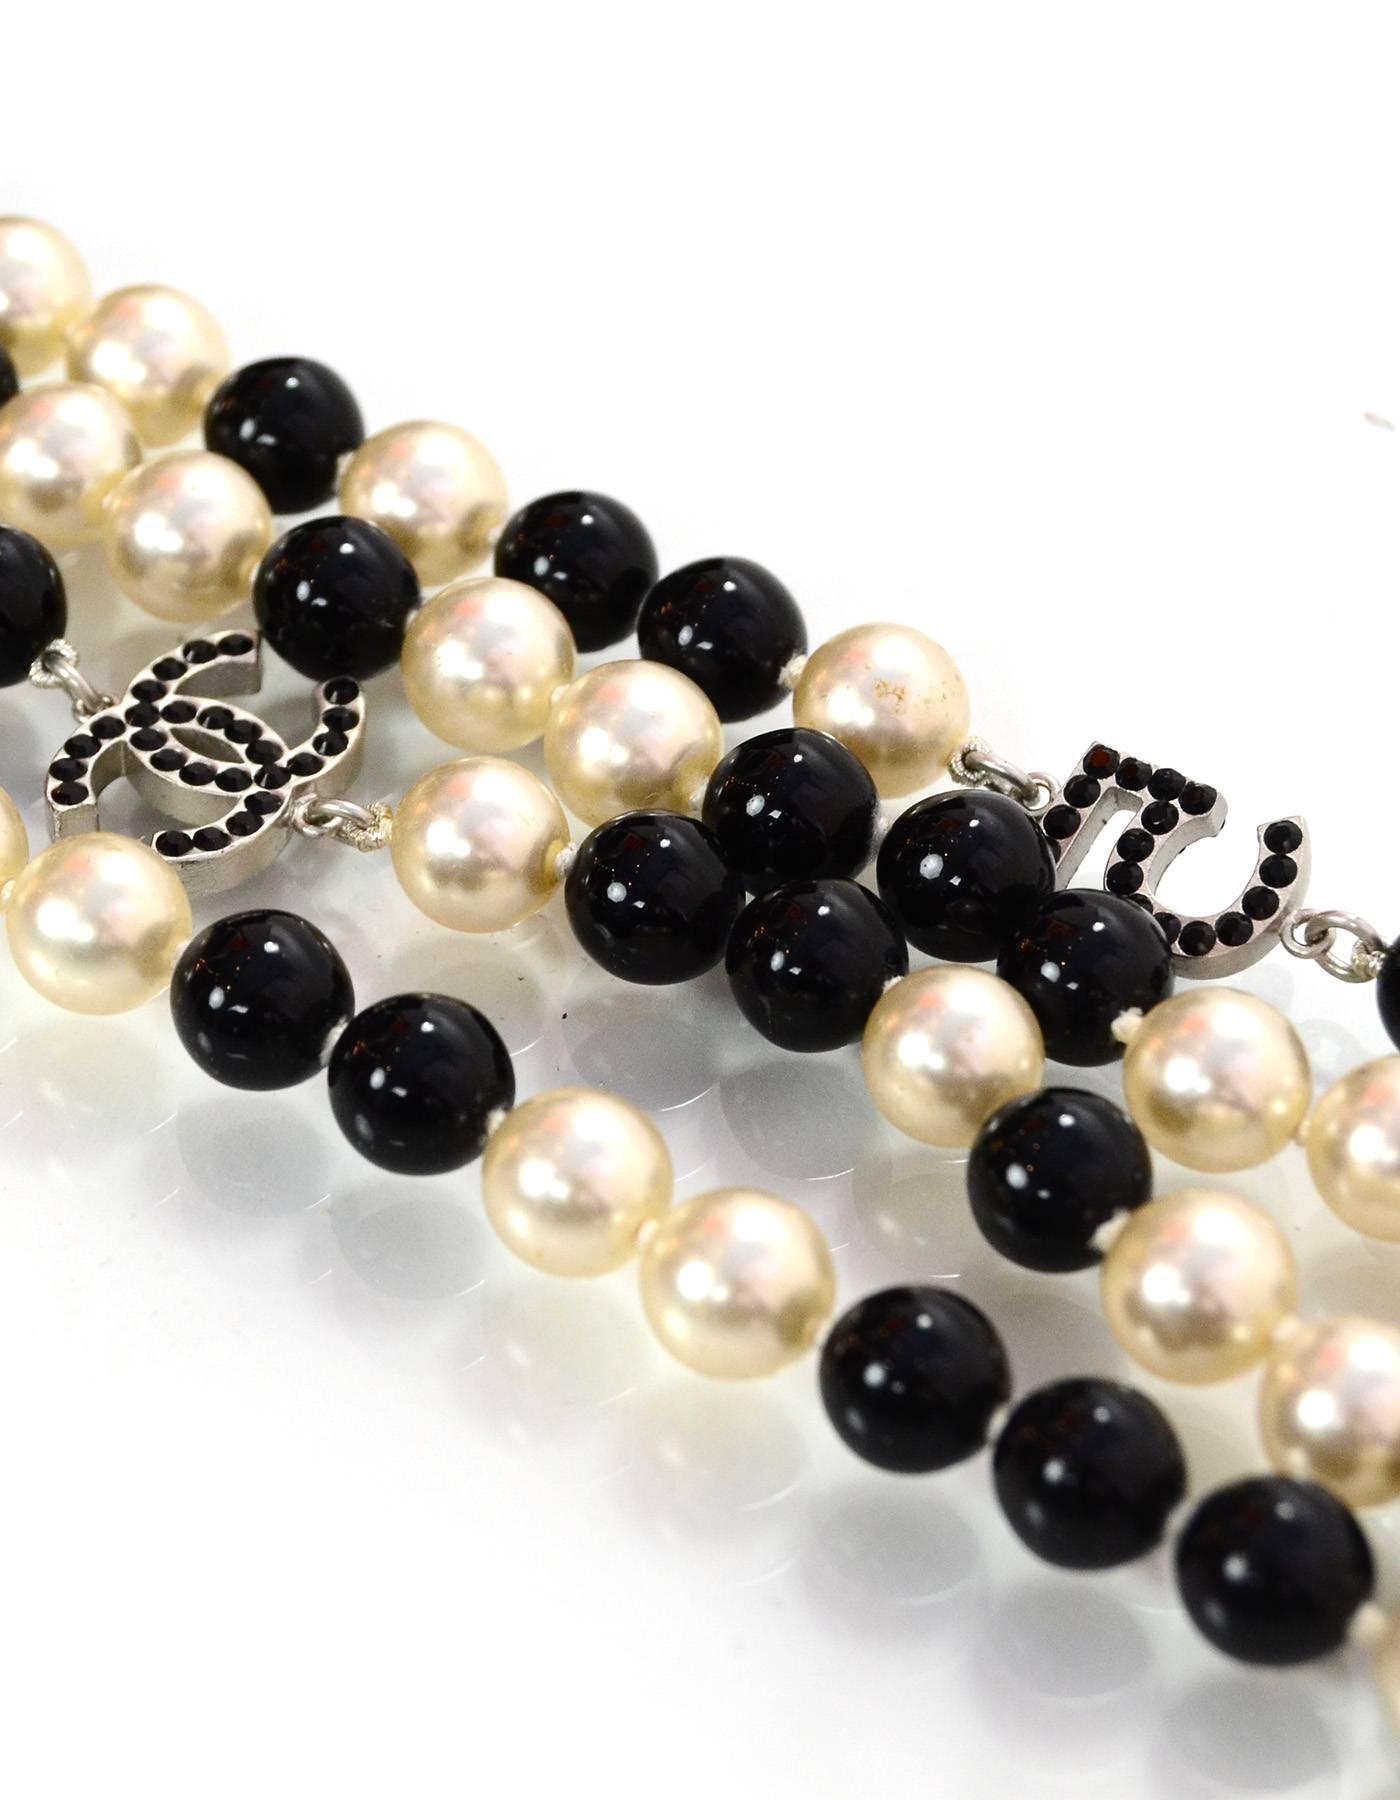 Chanel Pearl & Beaded Long Charm Necklace
Features black crystal CC, number 5, and four leaf clover pendants throughout

Made In: France
Year of Production: 2005
Color: Black and ivory
Hardware: Silvertone
Materials: Metal, faux pearl, crystal